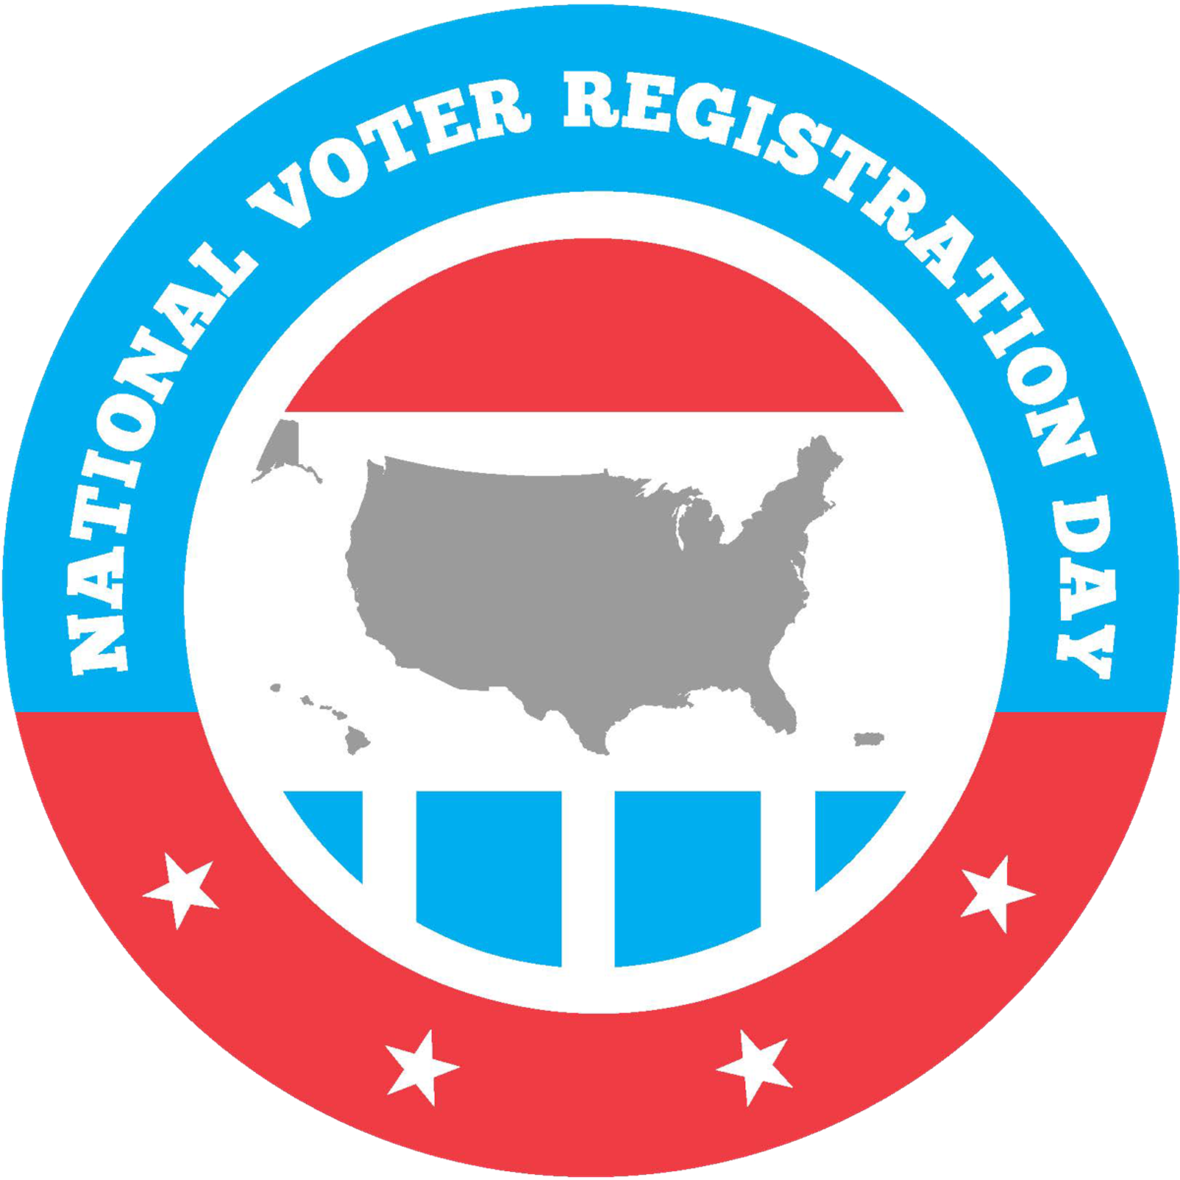 A blue and red seal featuring the text "National Voter Registration Day" and a silhouette of the United State of America in black.